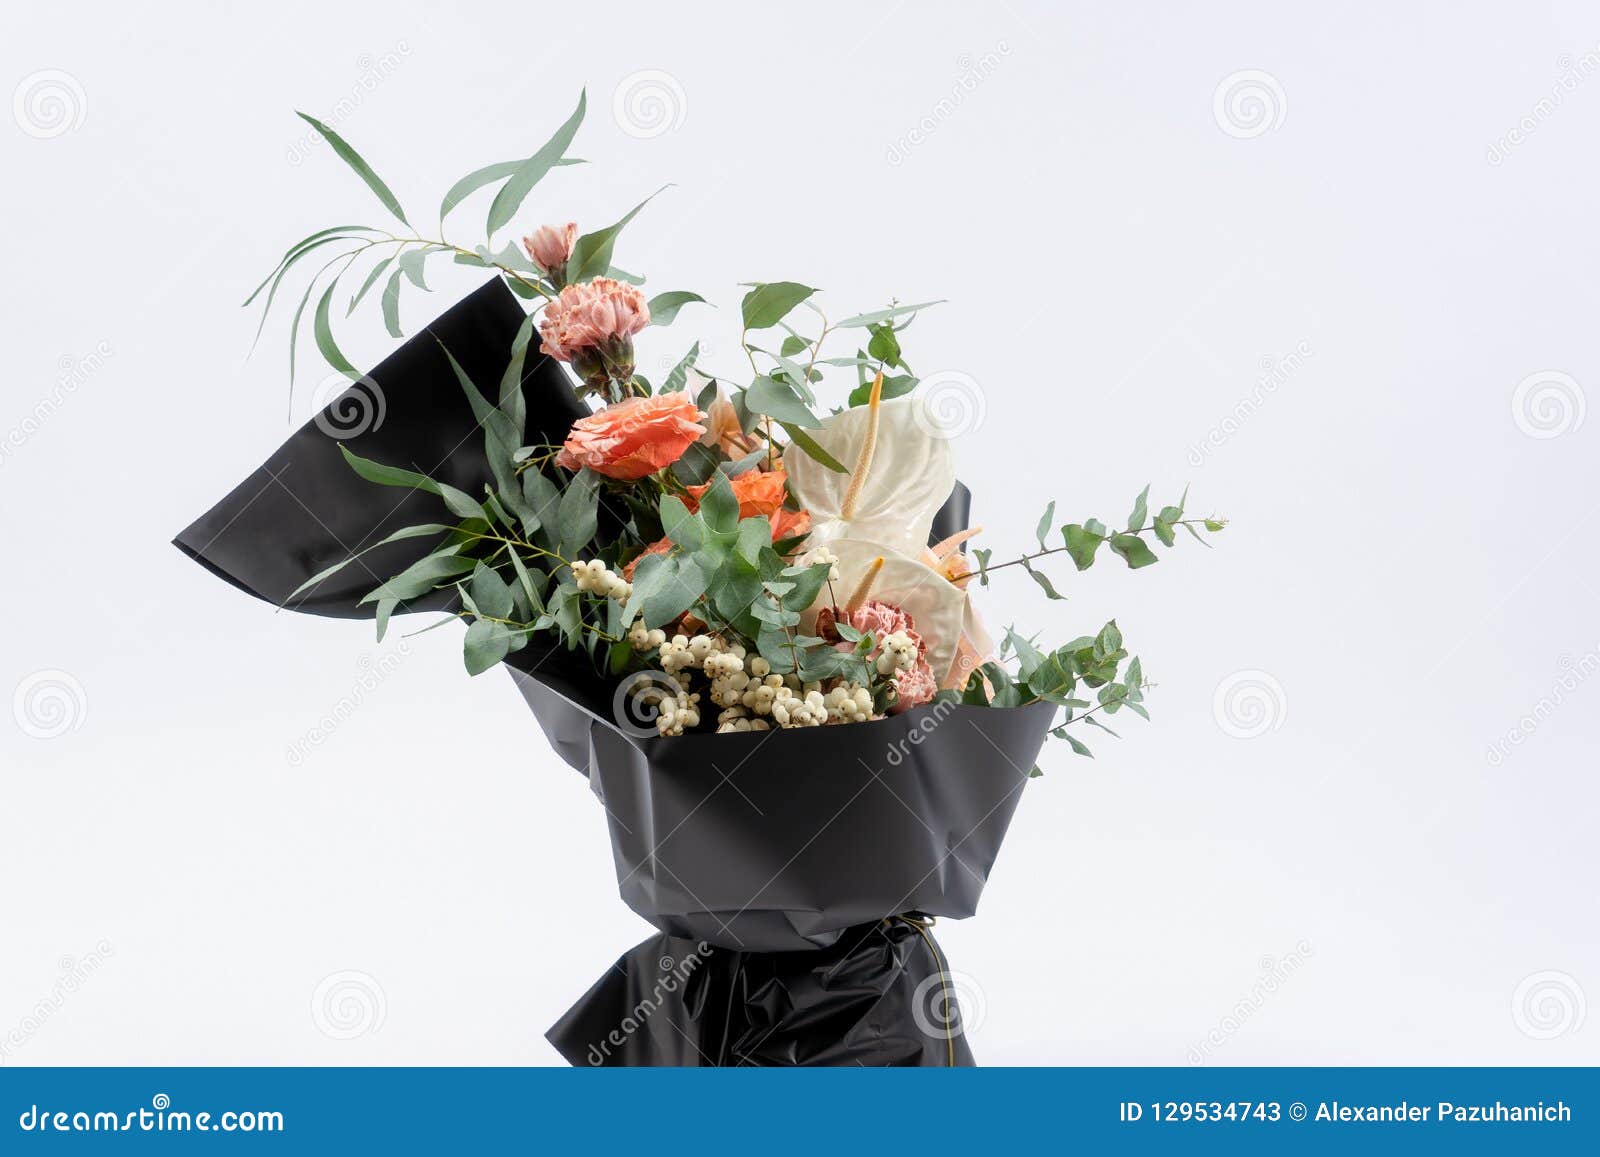 Beautiful Flowers Bouquet in Black Mate Paper. Roses and Pink Carnation.  White Background Stock Image - Image of beautiful, natural: 129534743